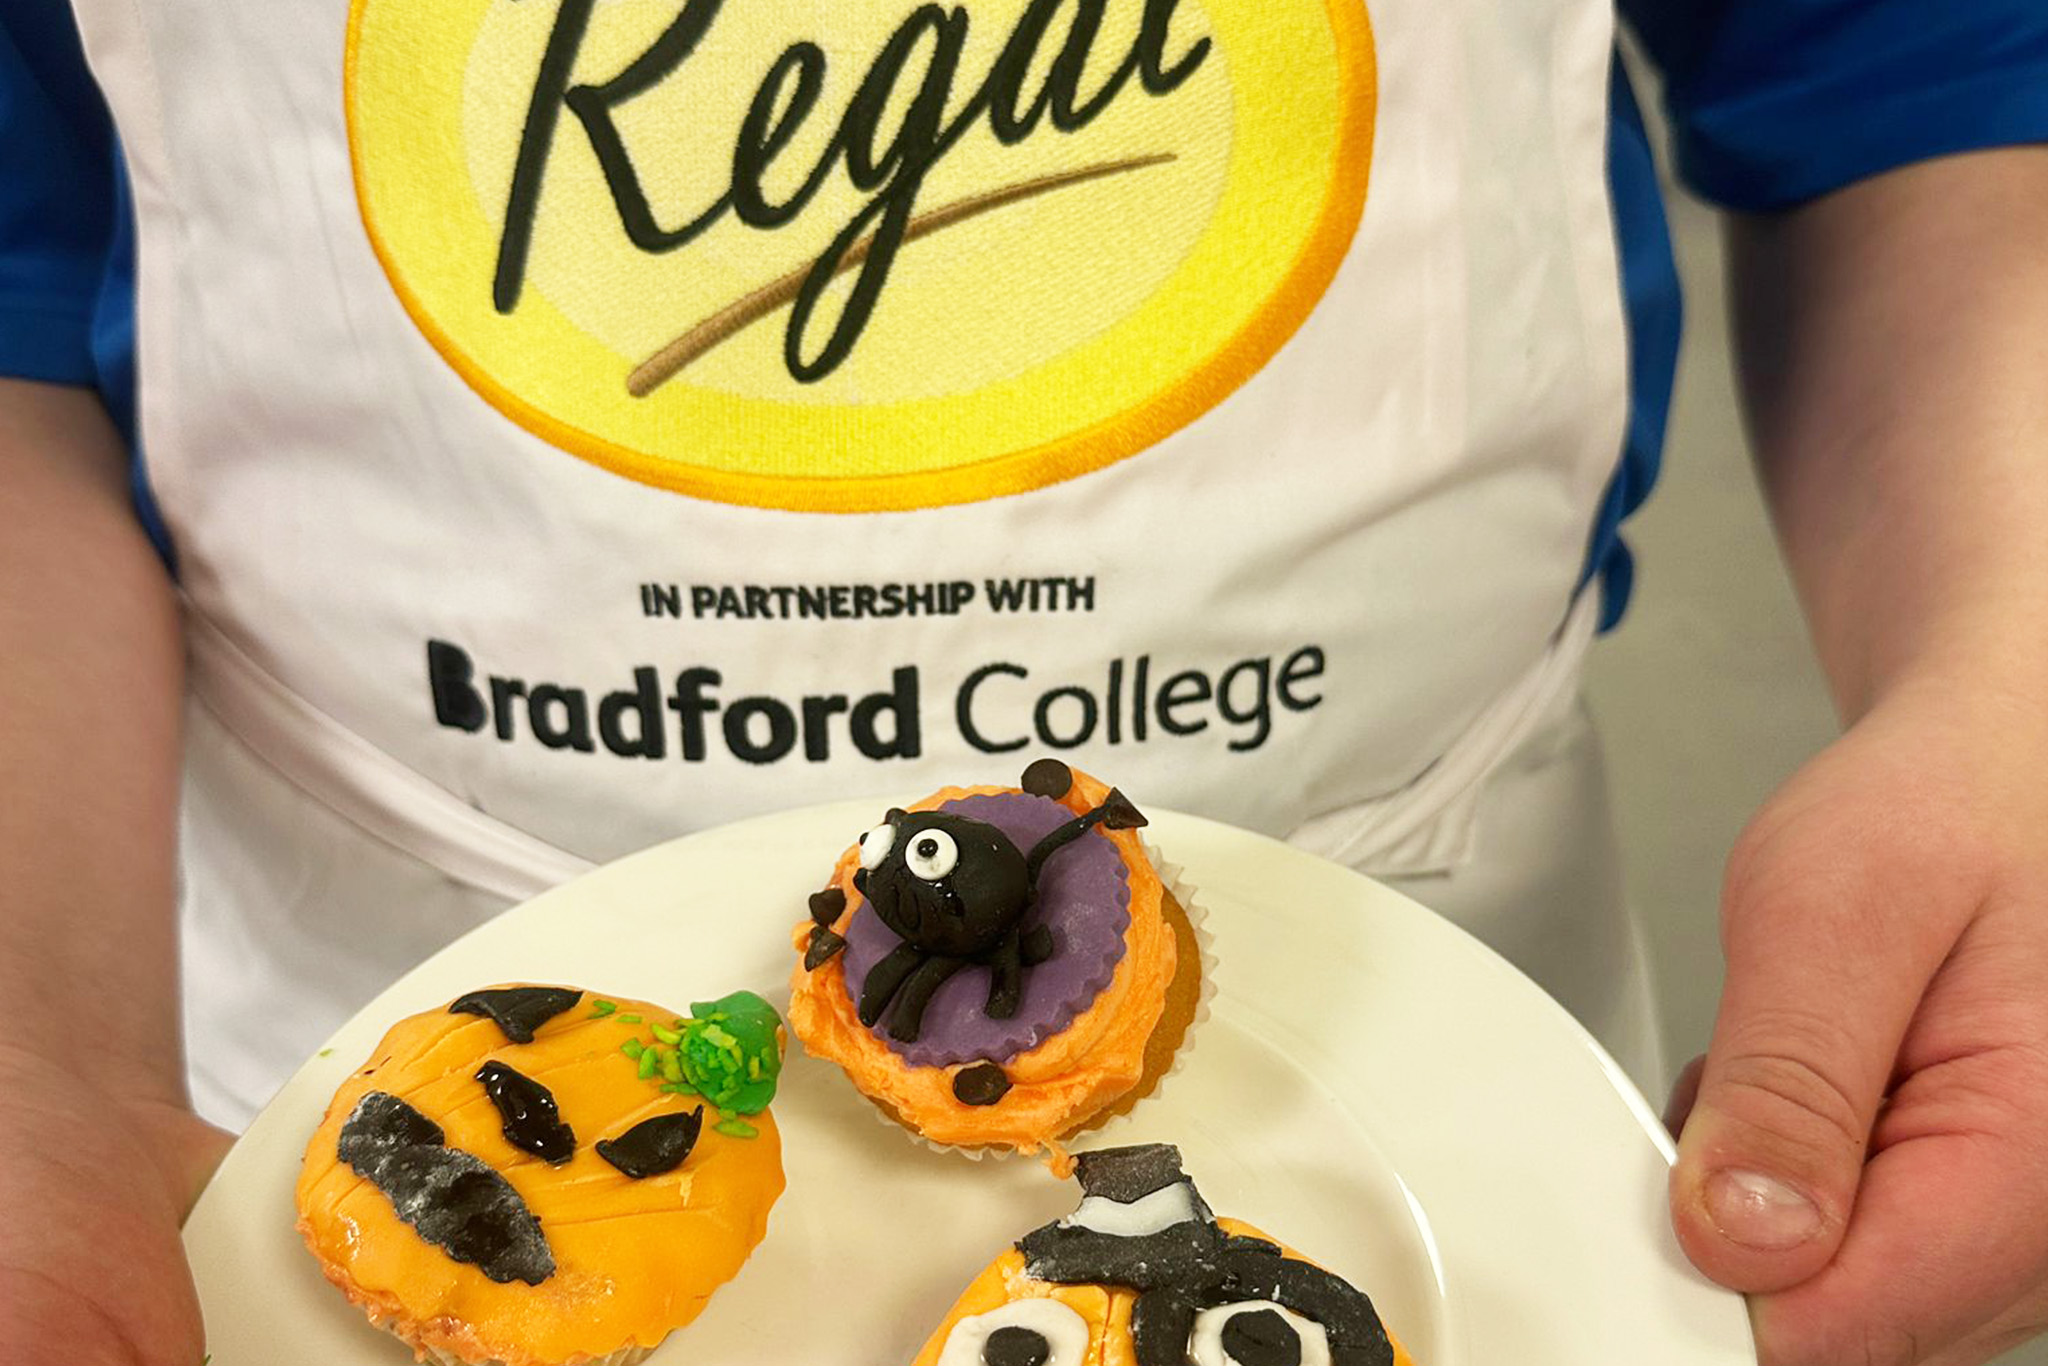 Regal Food Products Group are thrilled to have joined forces with Bradford College to deliver a series of taster days and workshops for both students at Bradford College and students of secondary and primary education within the local area.